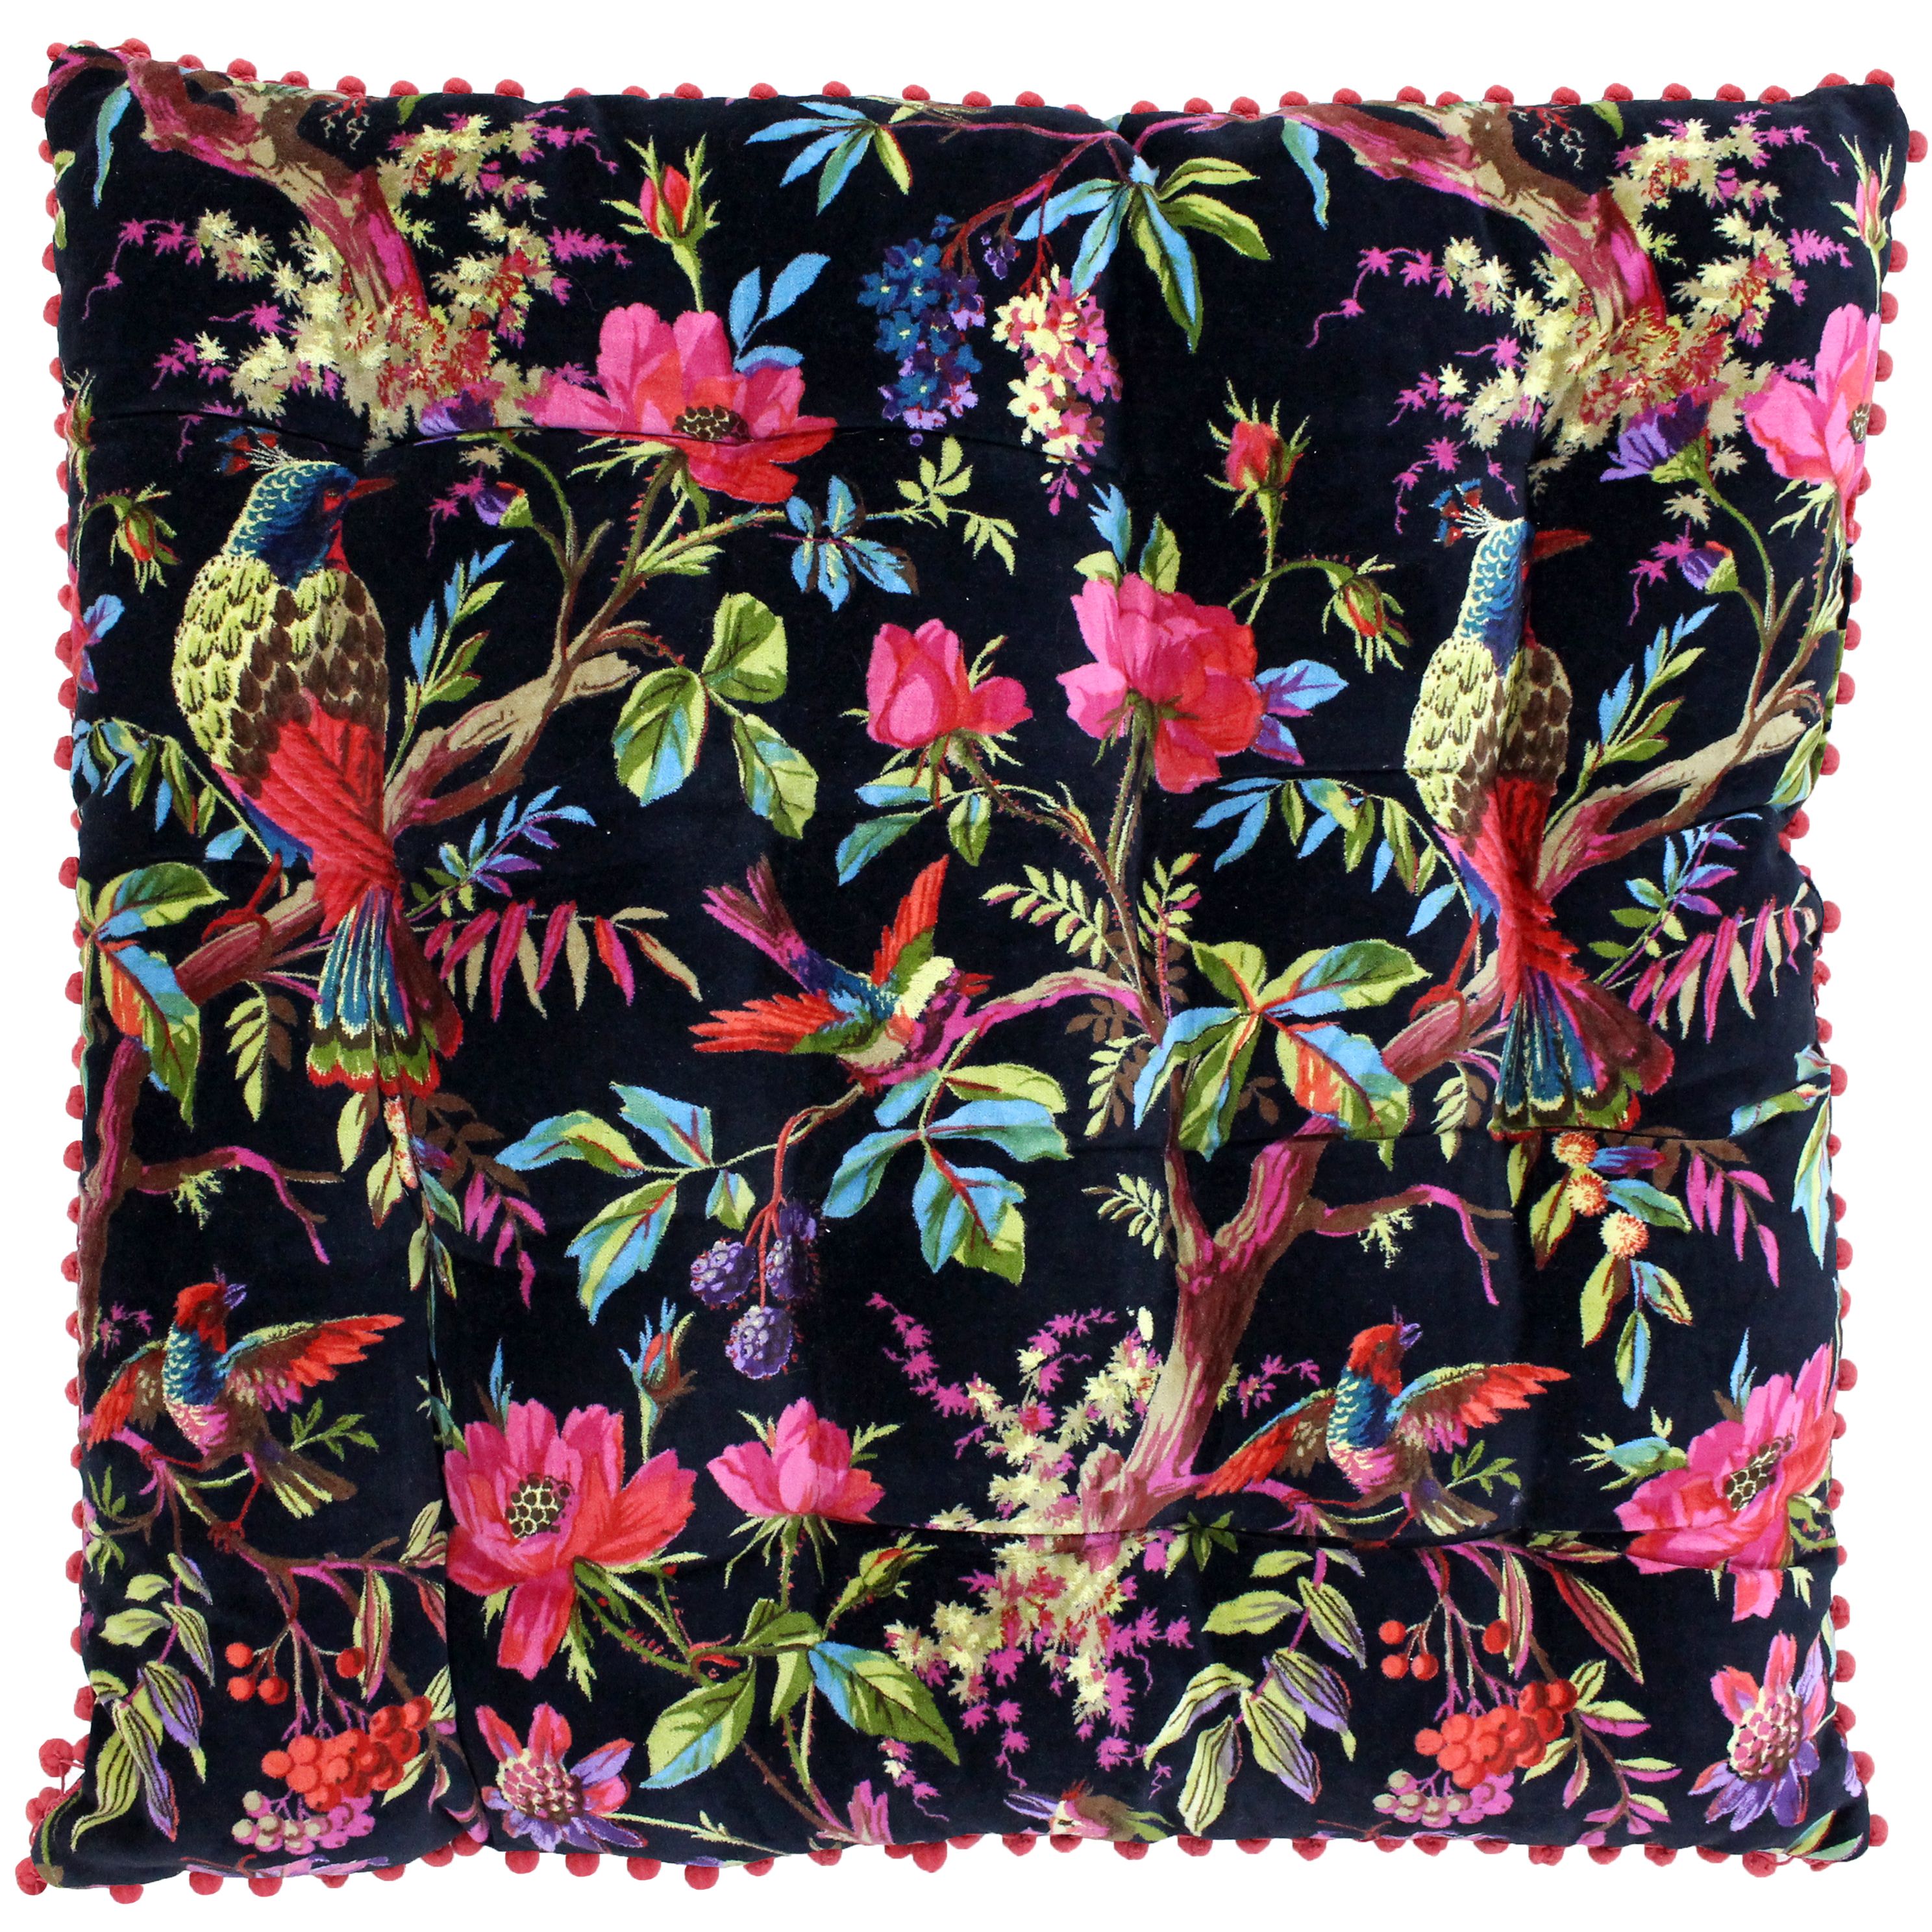 The Paradise floor cushion will bring a unique twist to any room with its Indian inspired nature print. Created in the chinoiserie style with an intricate display of birds and flowers this cushion will bring a whole new dimension to any room. The velvet feel fabric is gives this gorgeous cushions a wonderful sheen. Available in three distinct colourways there's a cushion for everyone whether you're likely to go the bold route of bright yellow or prefer to play it safe with uniform black. Made of 100% cotton fabric this cushion is super soft and cosy making it perfect for sitting on to meditate, read or work. This floor cushion is filled with 100% hollowfibre polyester to make it as plush as possible. This floor cushion must be treated carefully and is therefore dry clean only. However, it is both tumble dryable and iron appropriate.